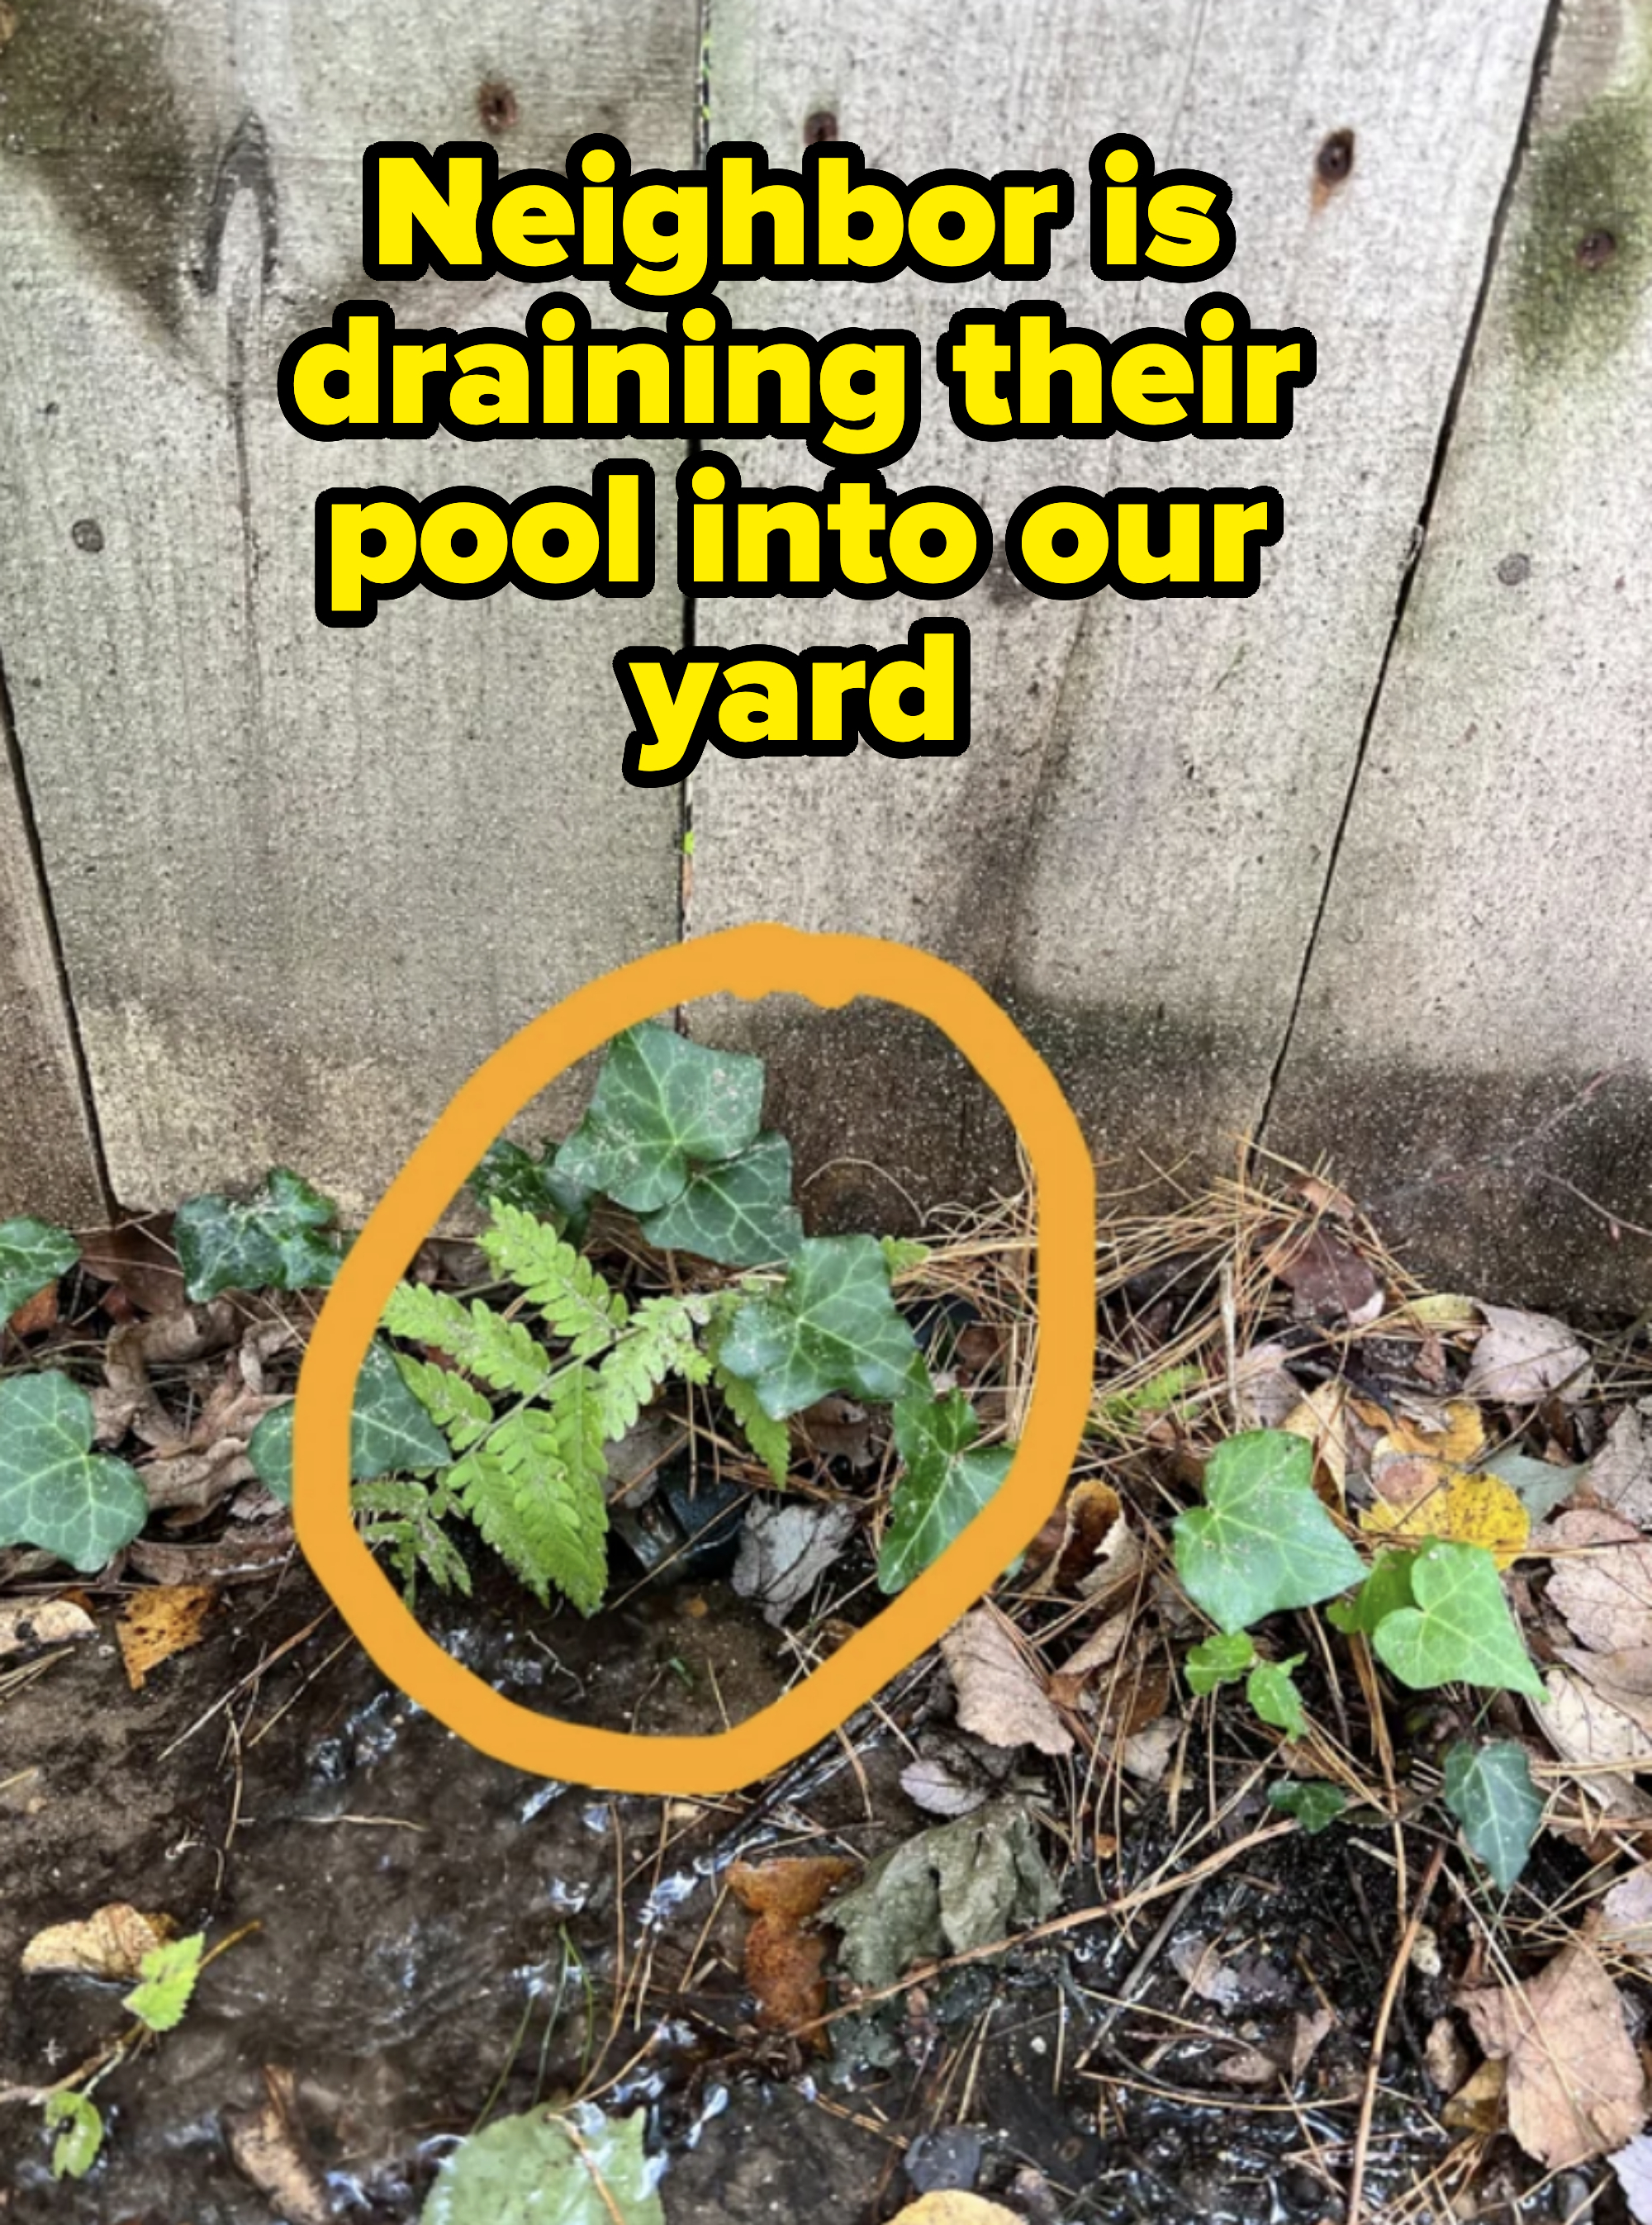 &quot;Neighbor is draining their pool into our yard&quot; with a hose circled